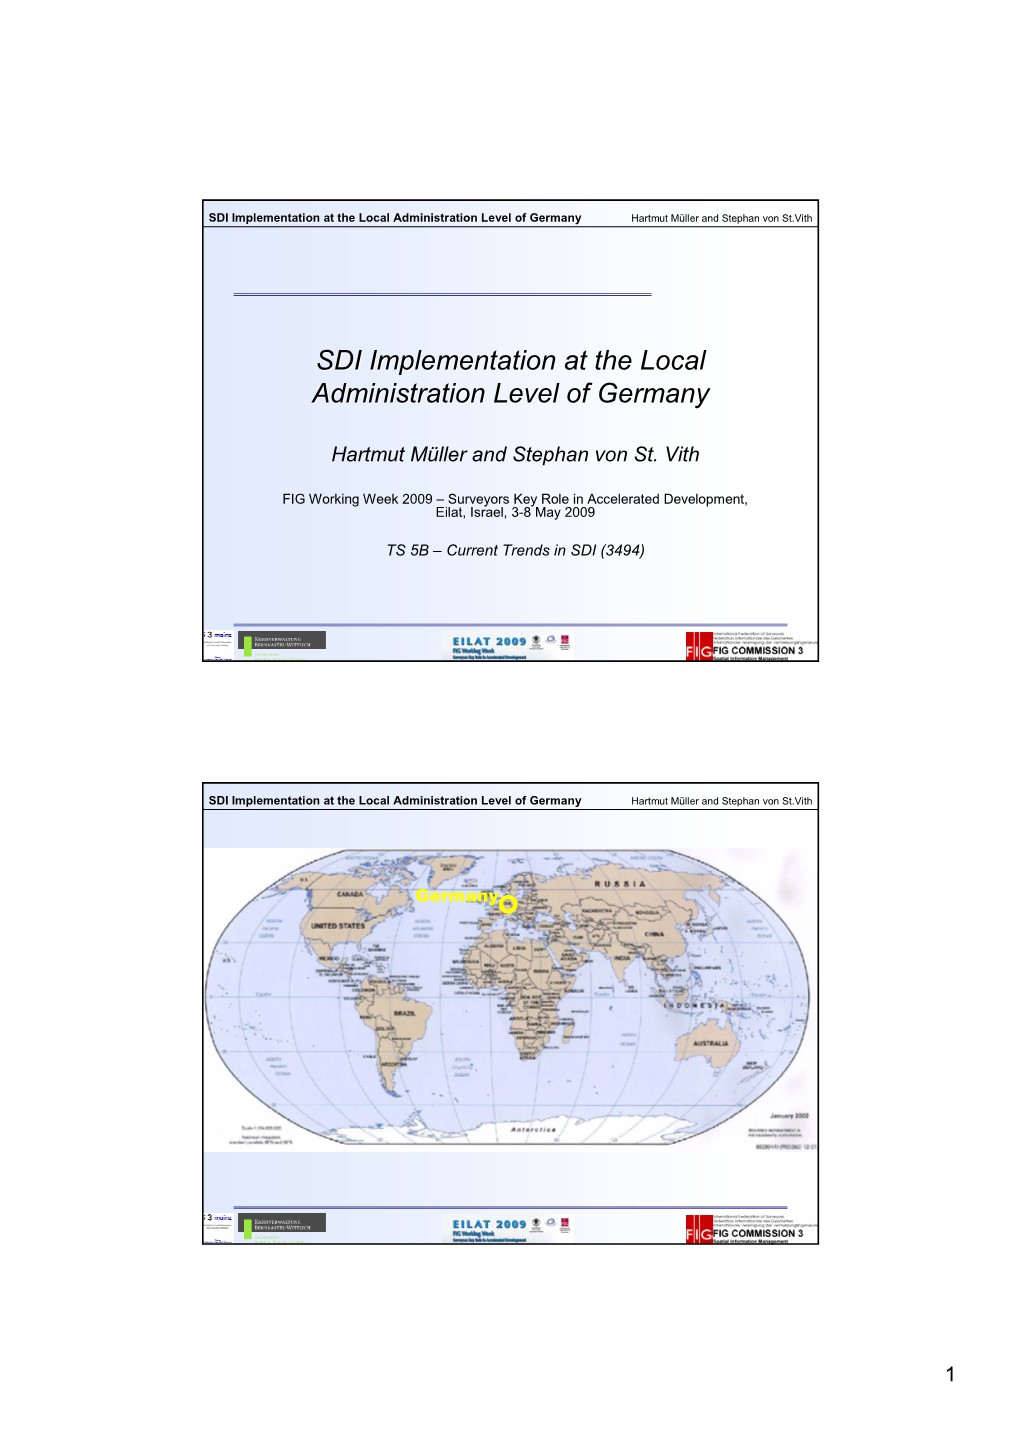 SDI Implementation at the Local Administration Level of Germany Hartmut Müller and Stephan Von St.Vith